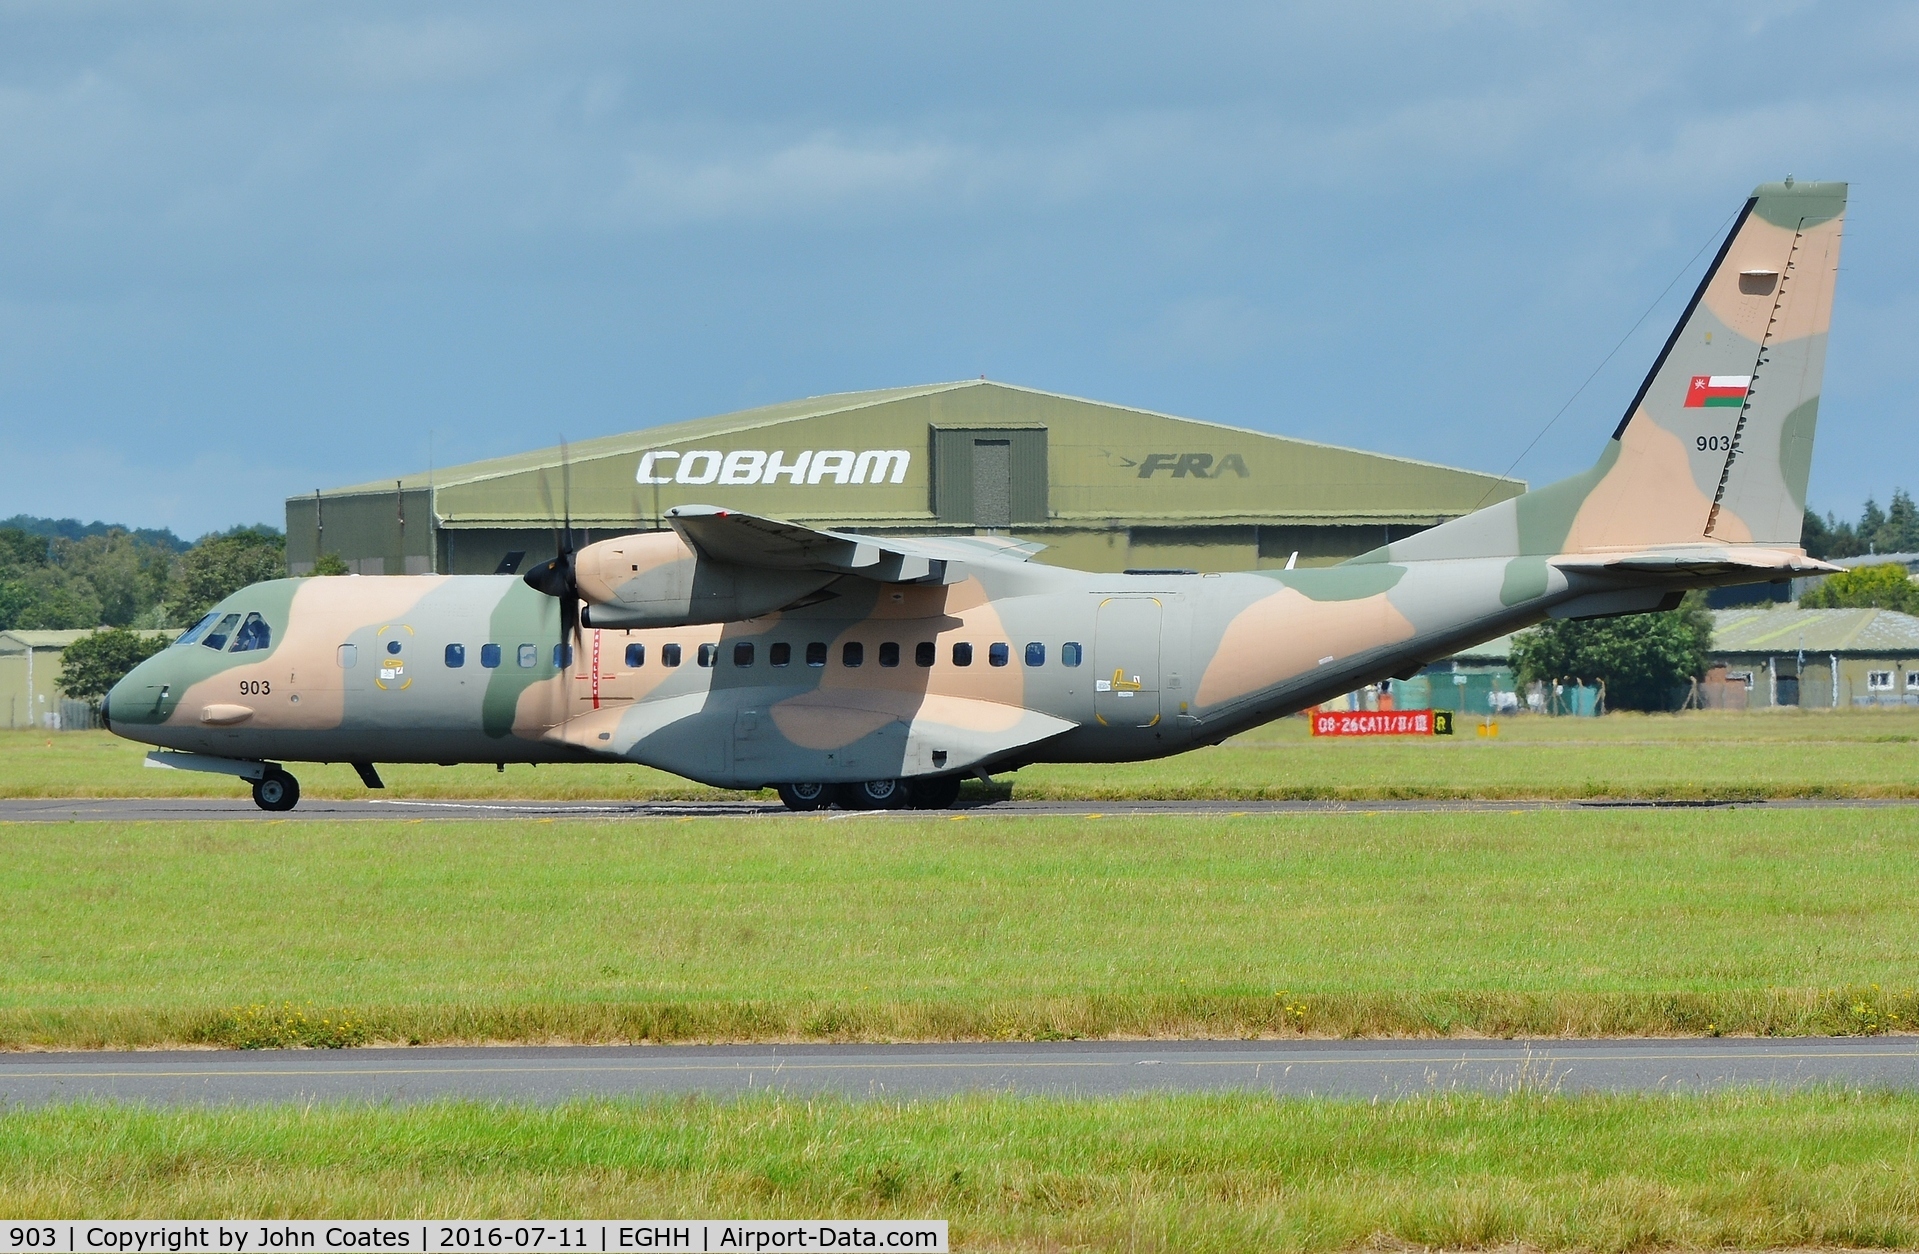 903, CASA C-295M C/N S-108, Royal Air Force of Oman aircraft calling on way home from RIAT 2016